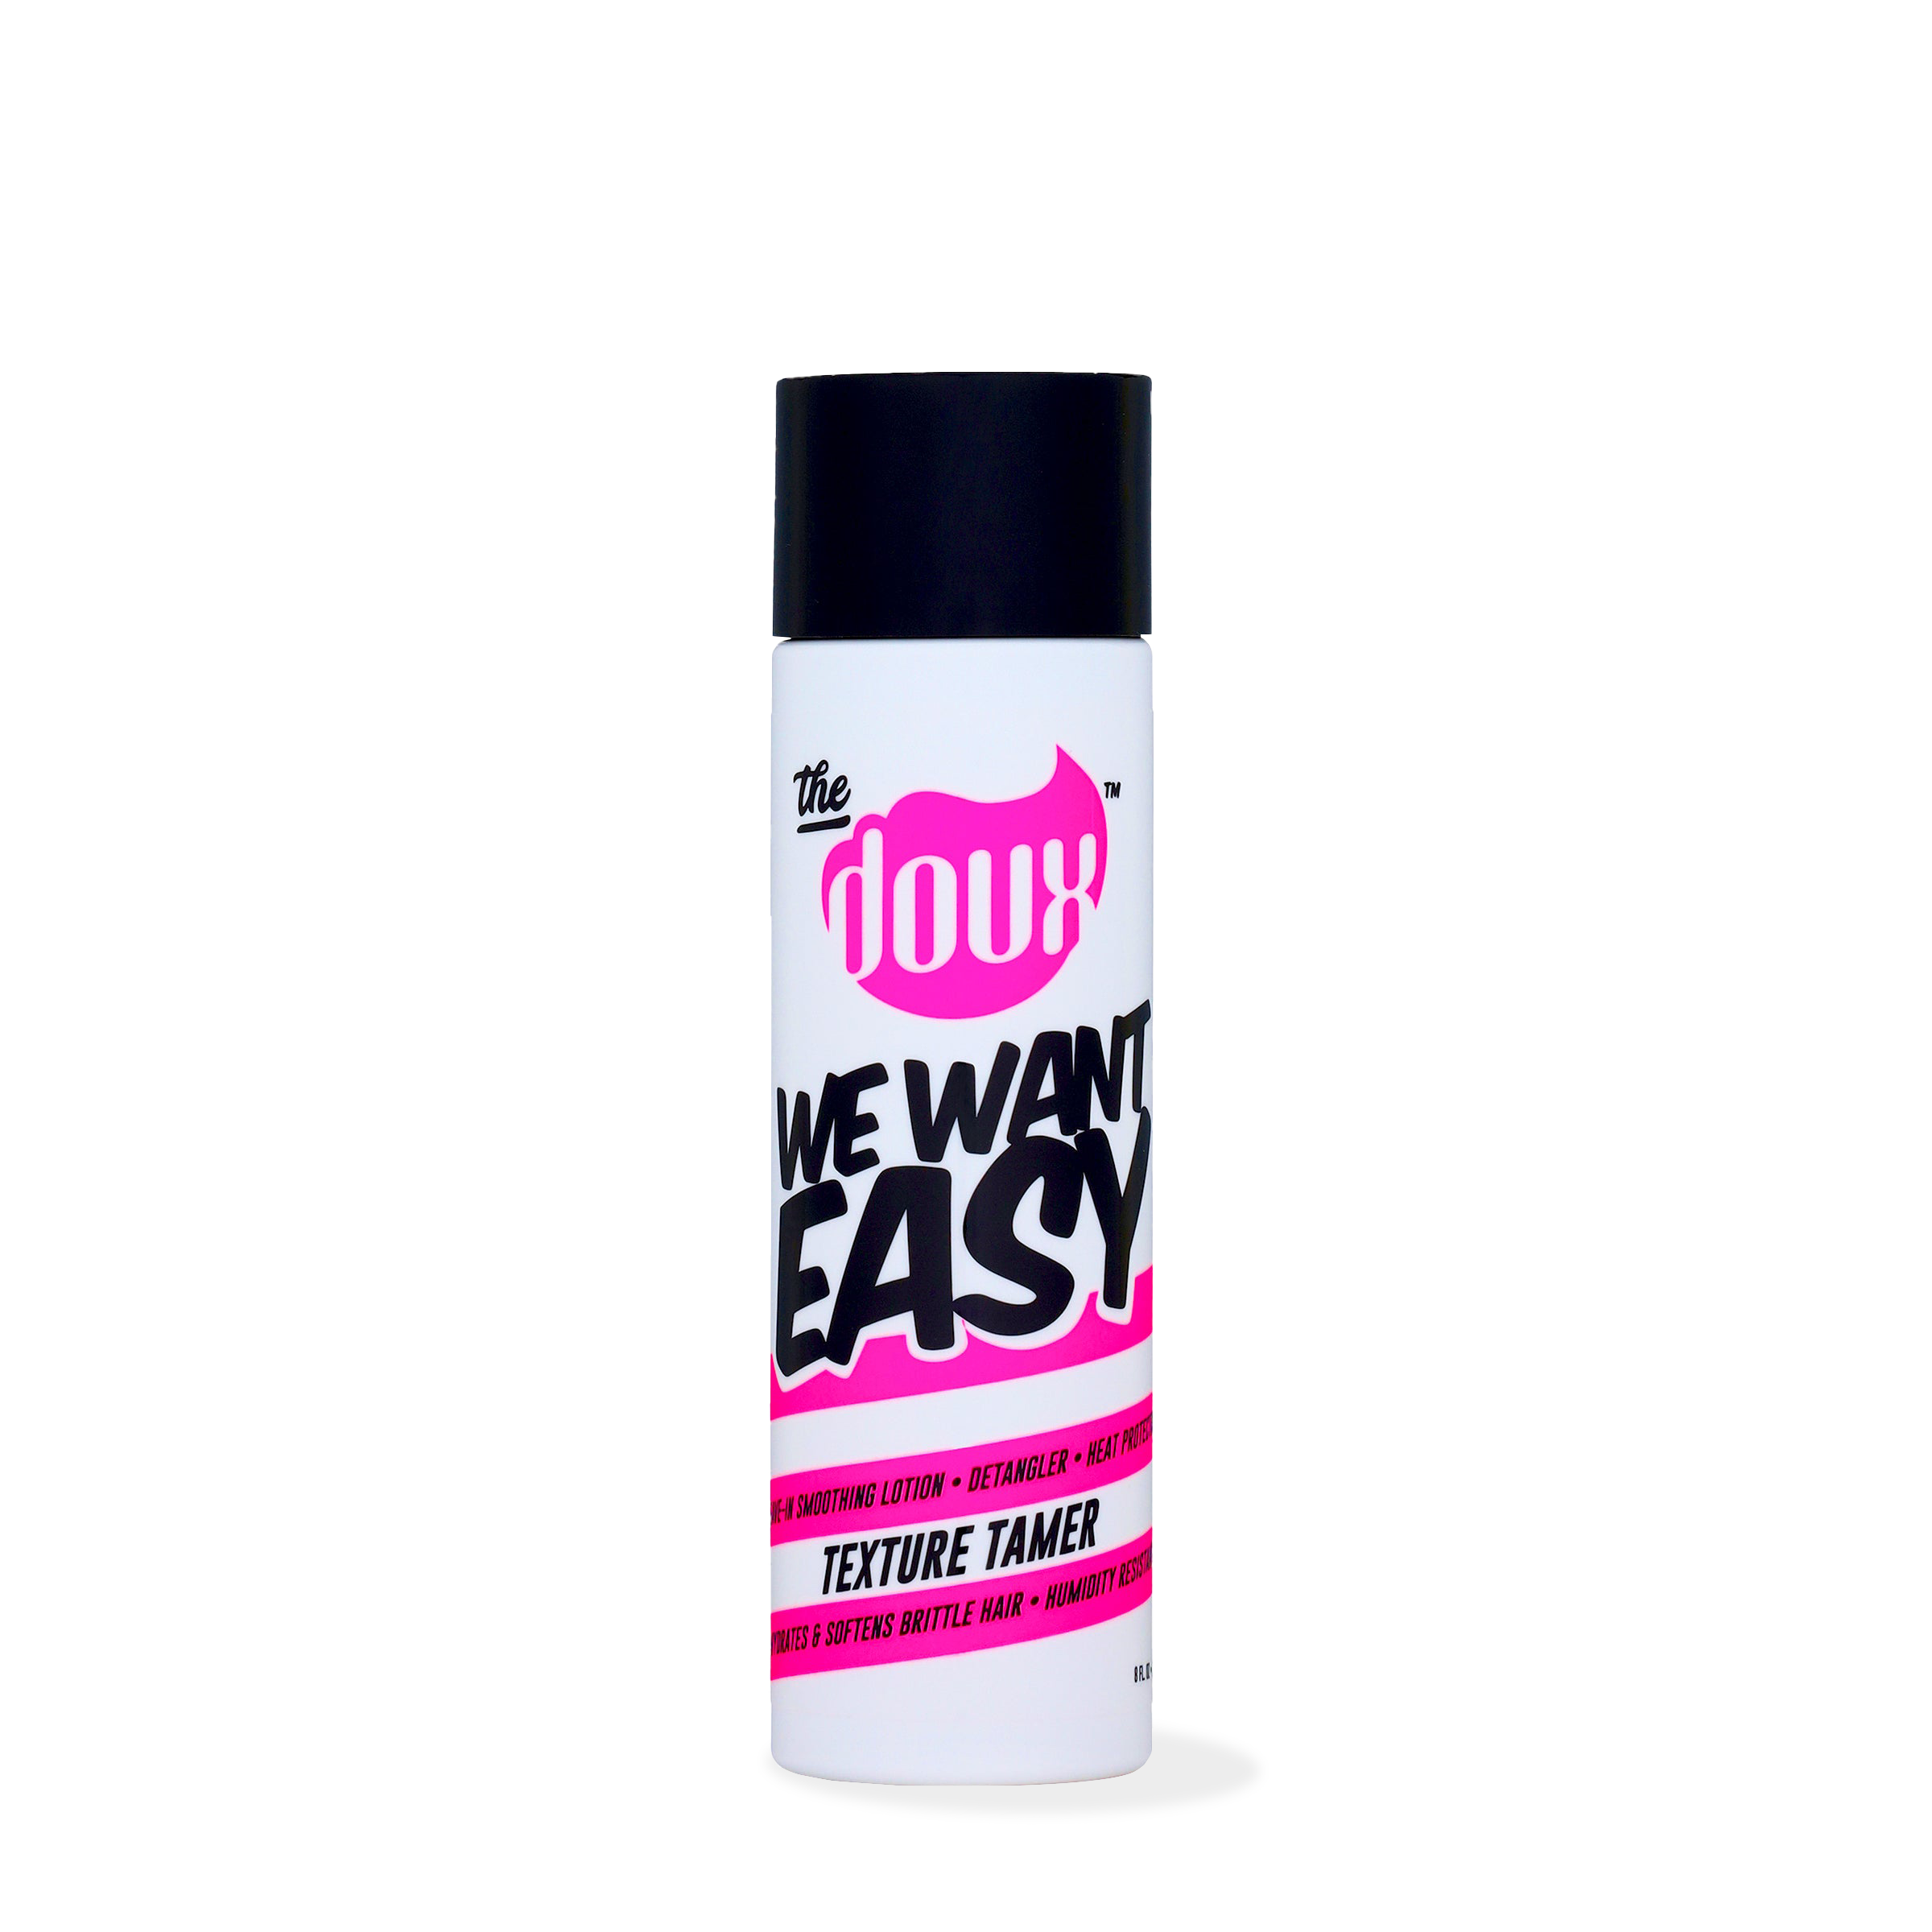 WE WANT EASY Texture Tamer™